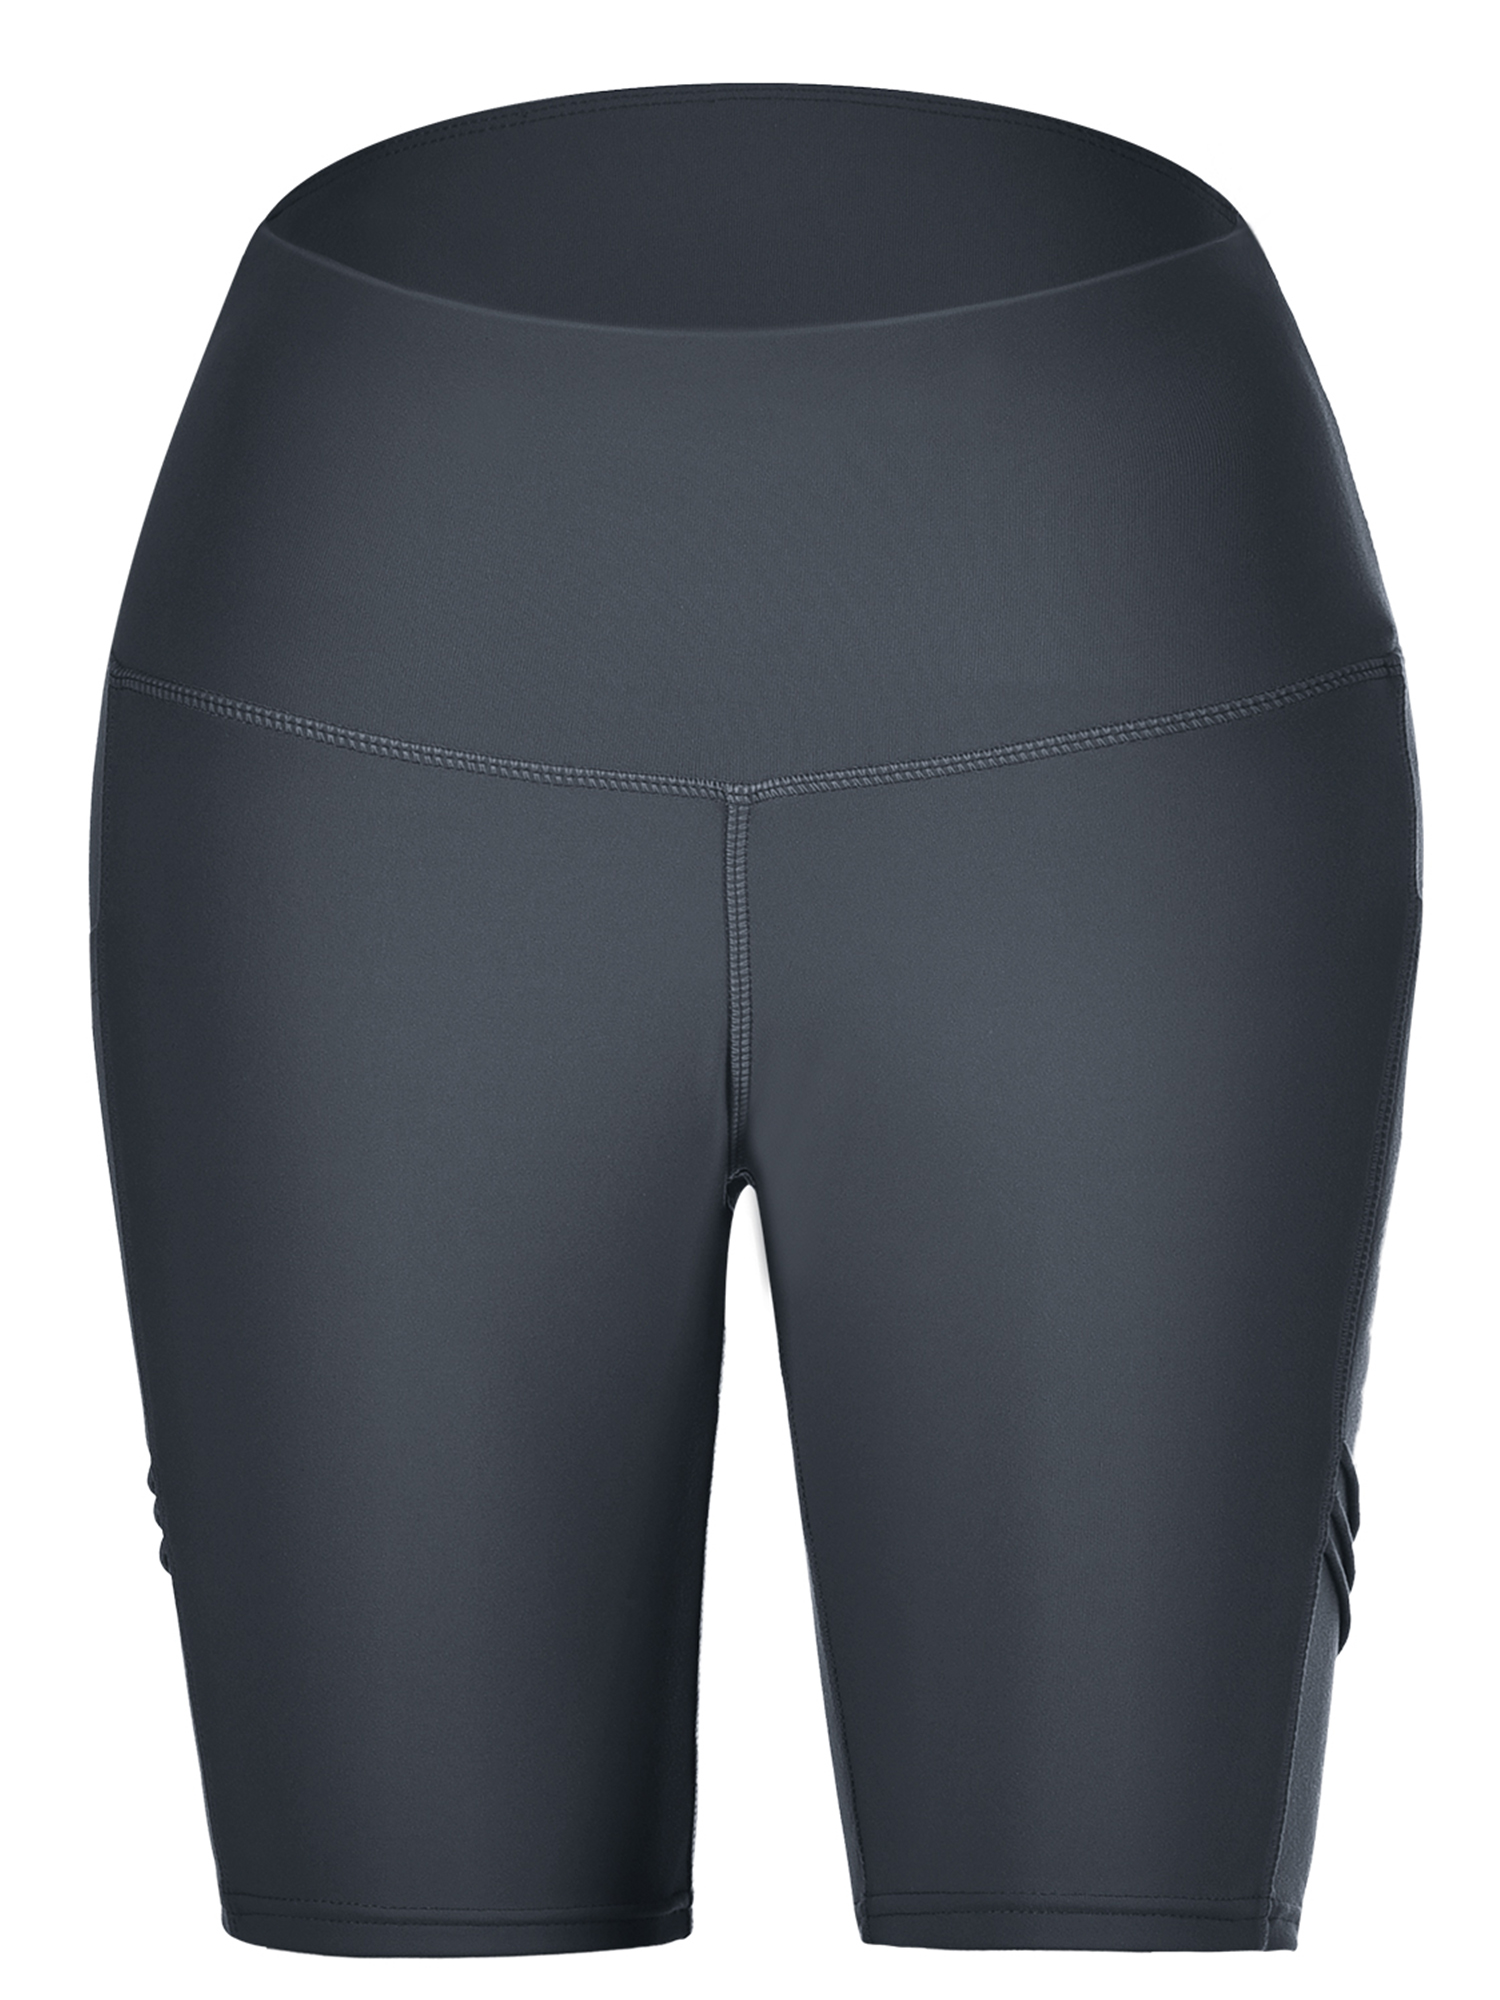 Tummy Control Yoga Shorts with Pockets for Women Workout Running Athletic Bike High Waist Activewear Bottoms - image 2 of 8